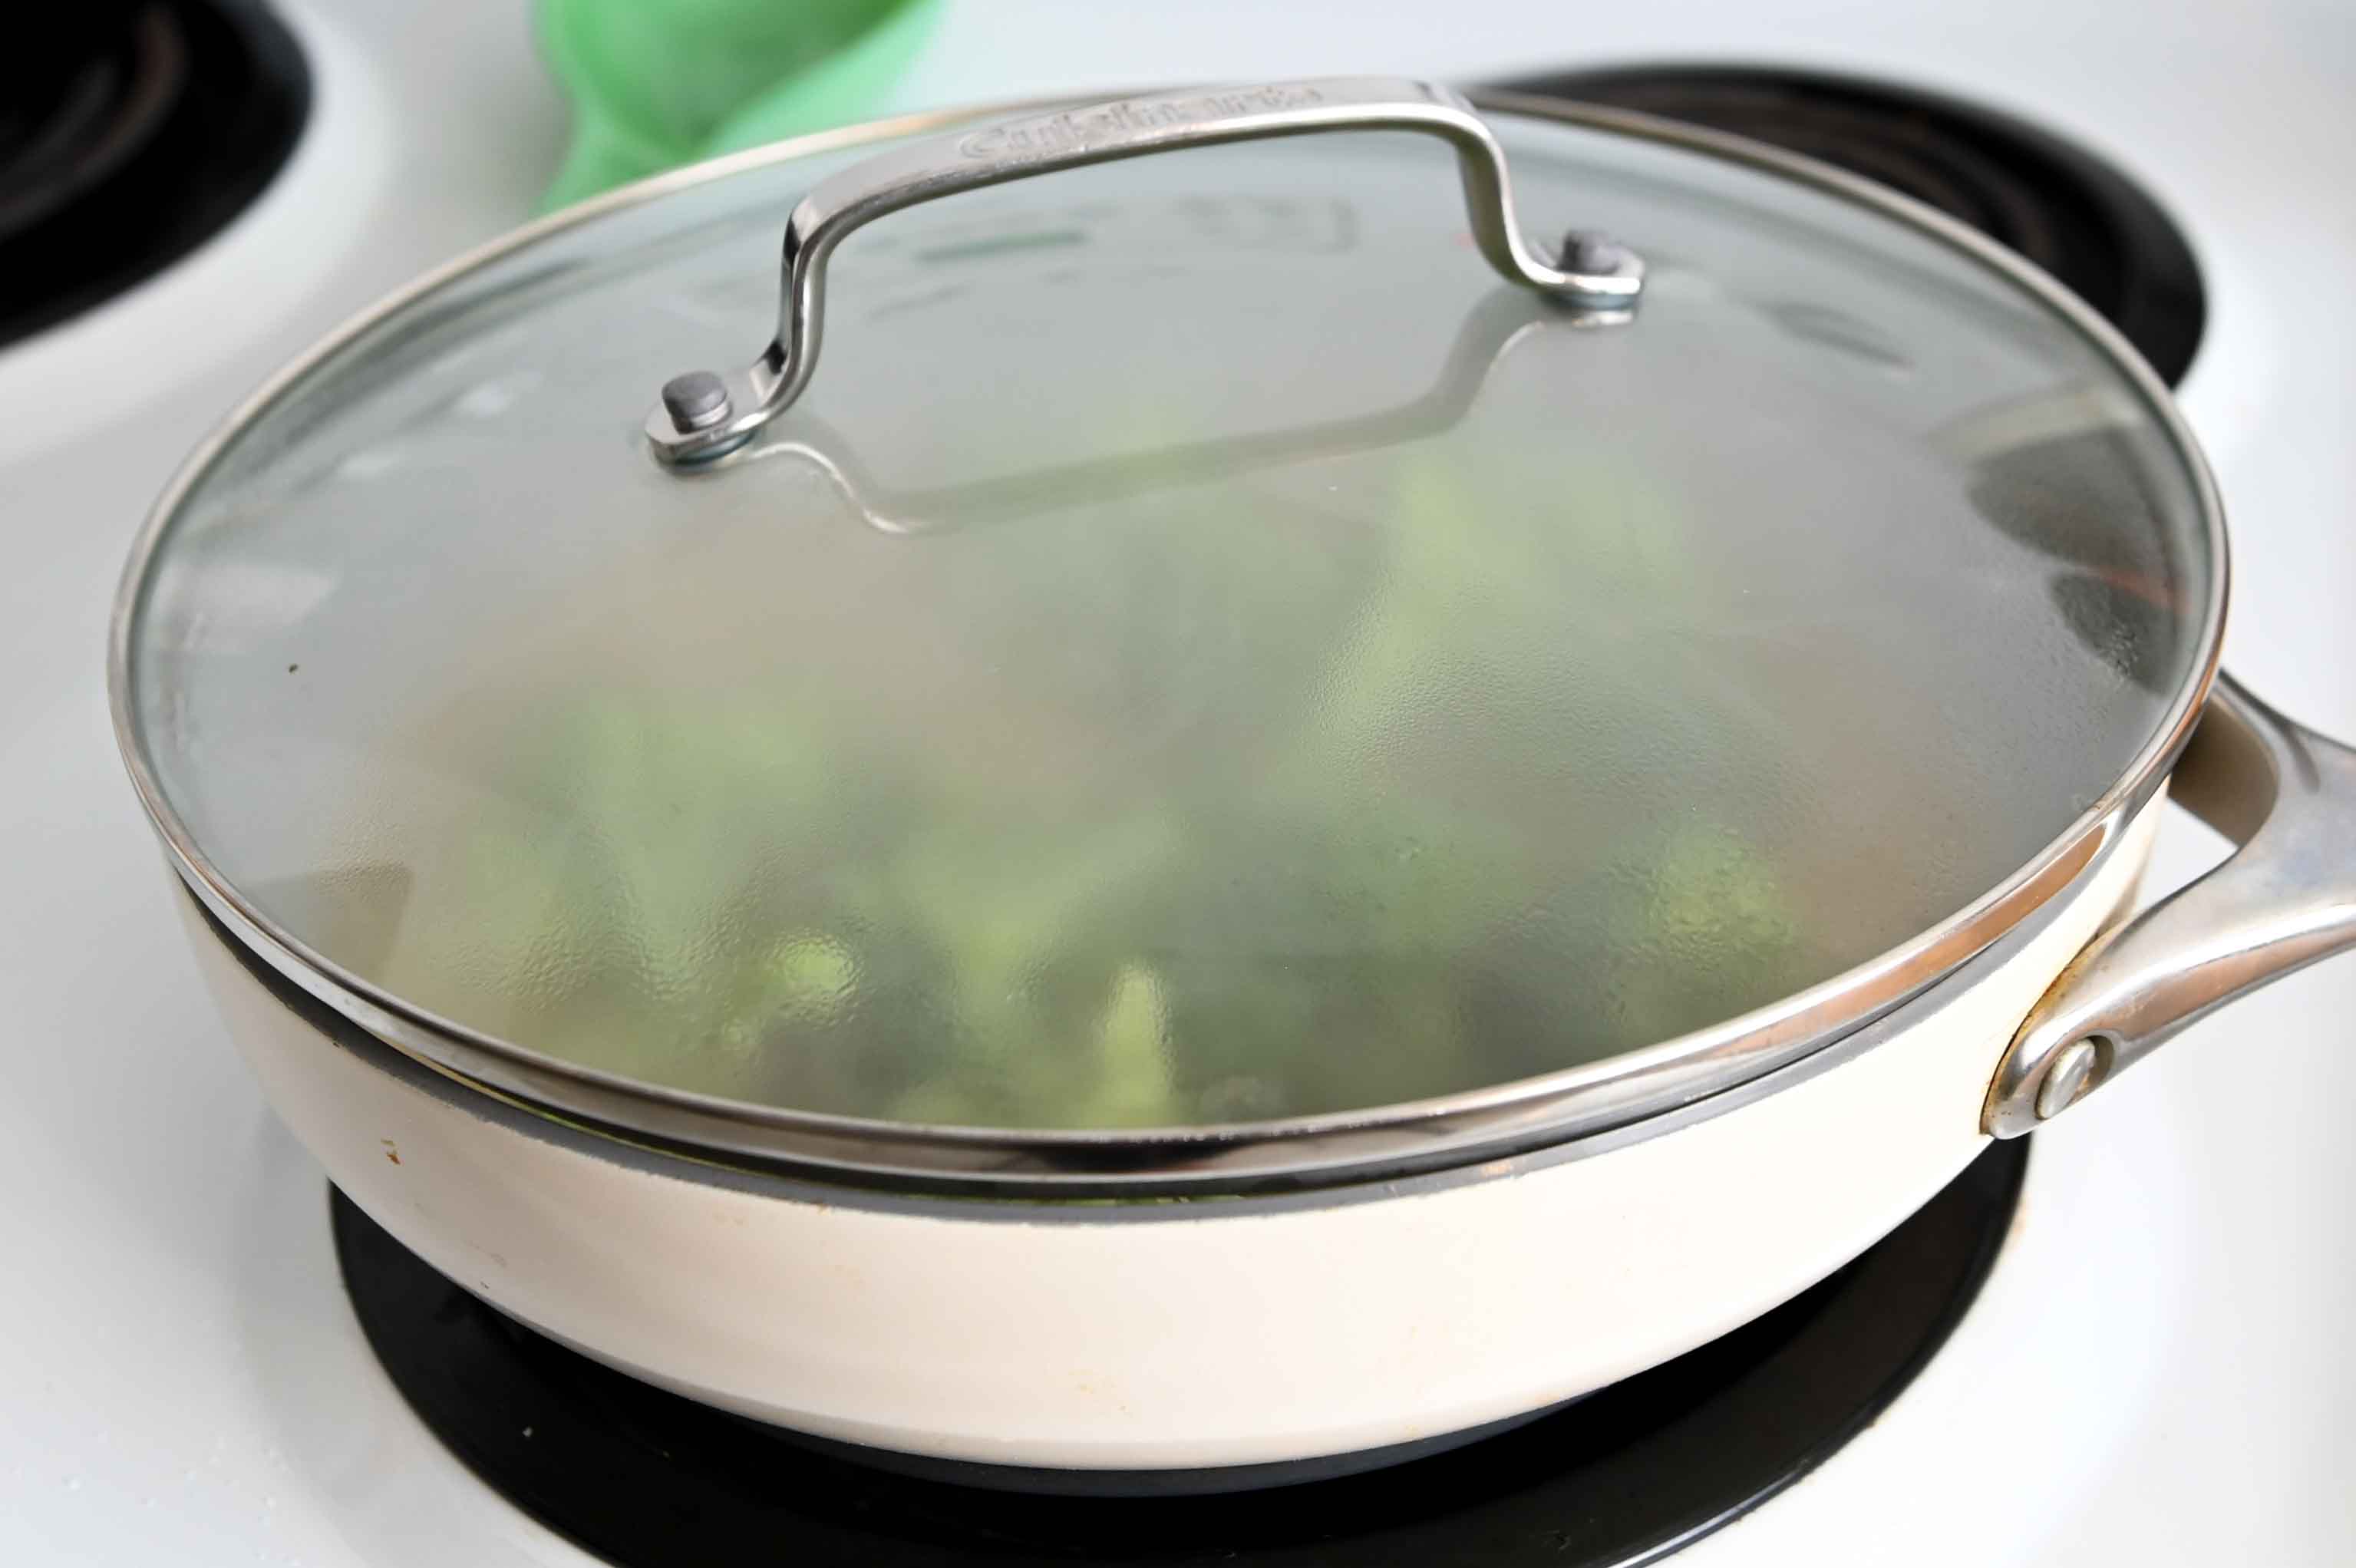 White skillet covered with a lid.